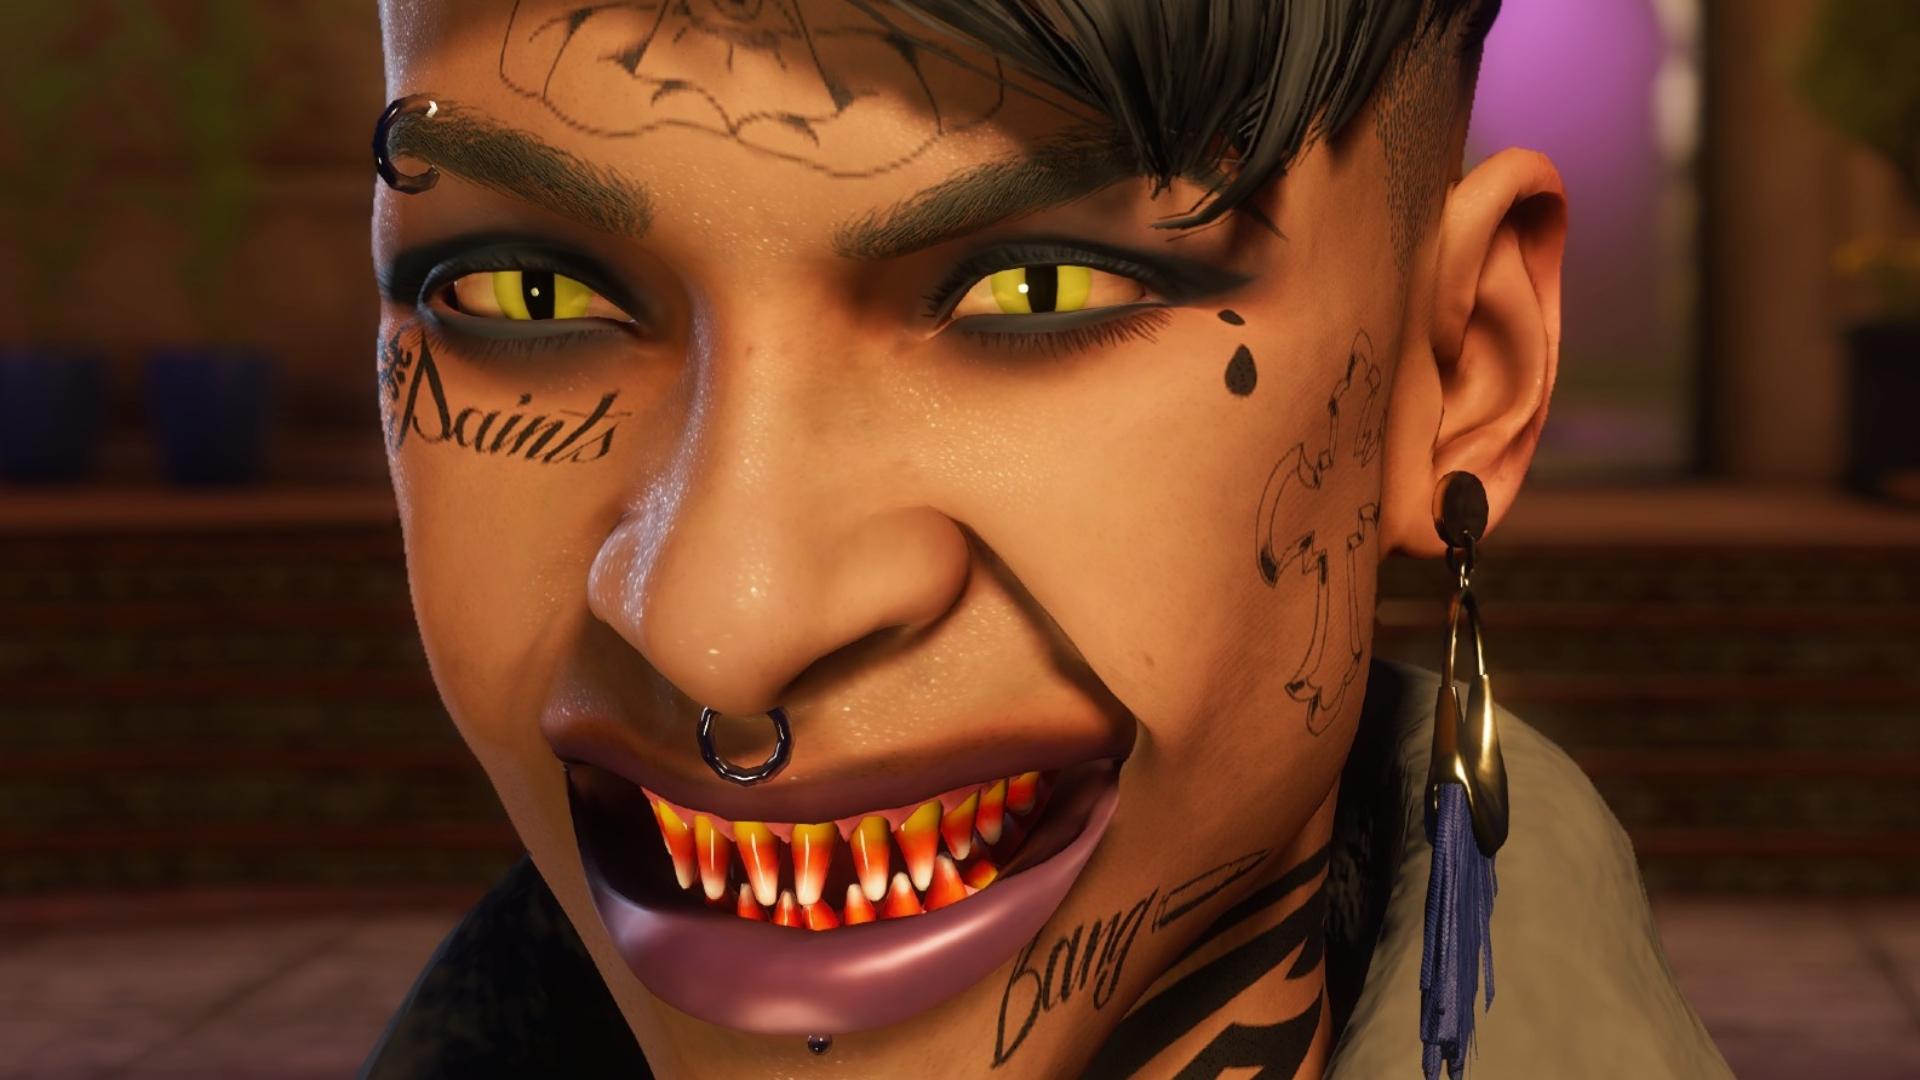 Saints Row reboot's third and final expansion arrives next week